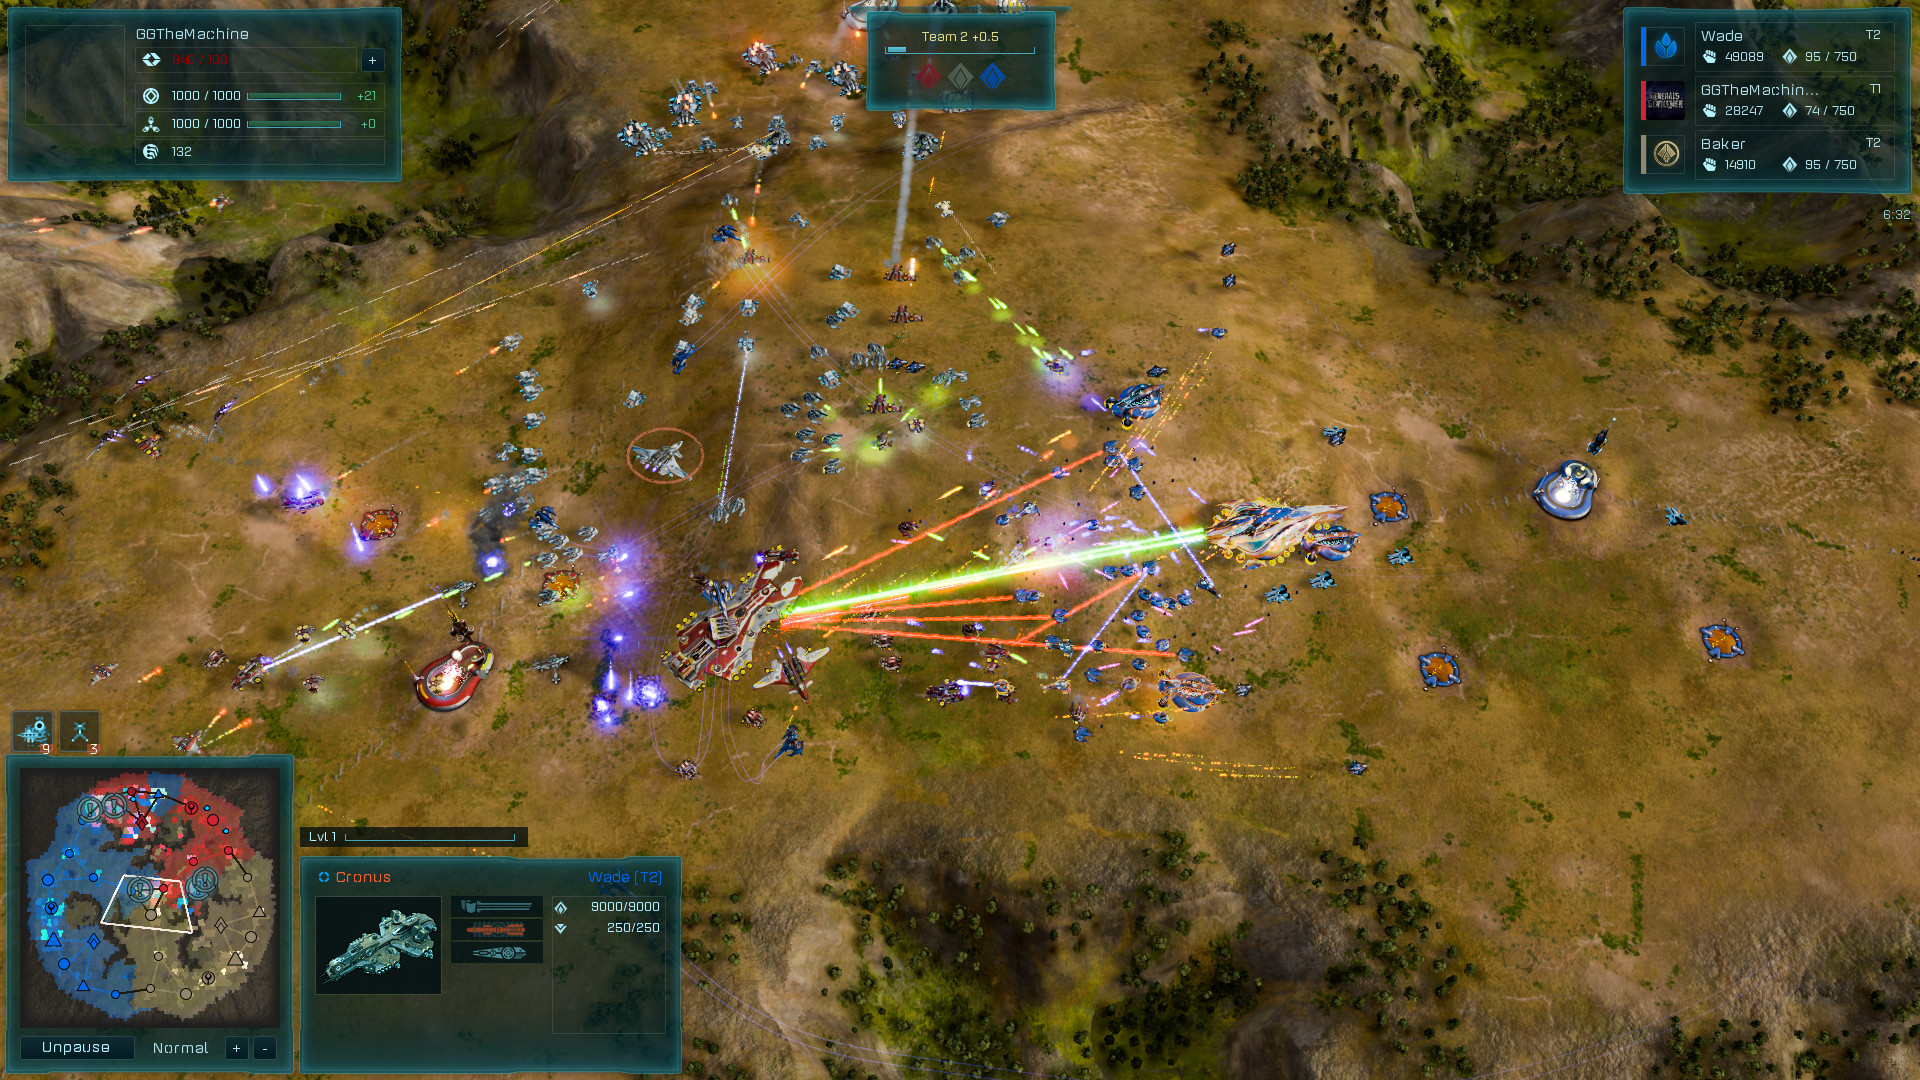 Ashes of the Singularity: Escalation - Inception DLC Featured Screenshot #1